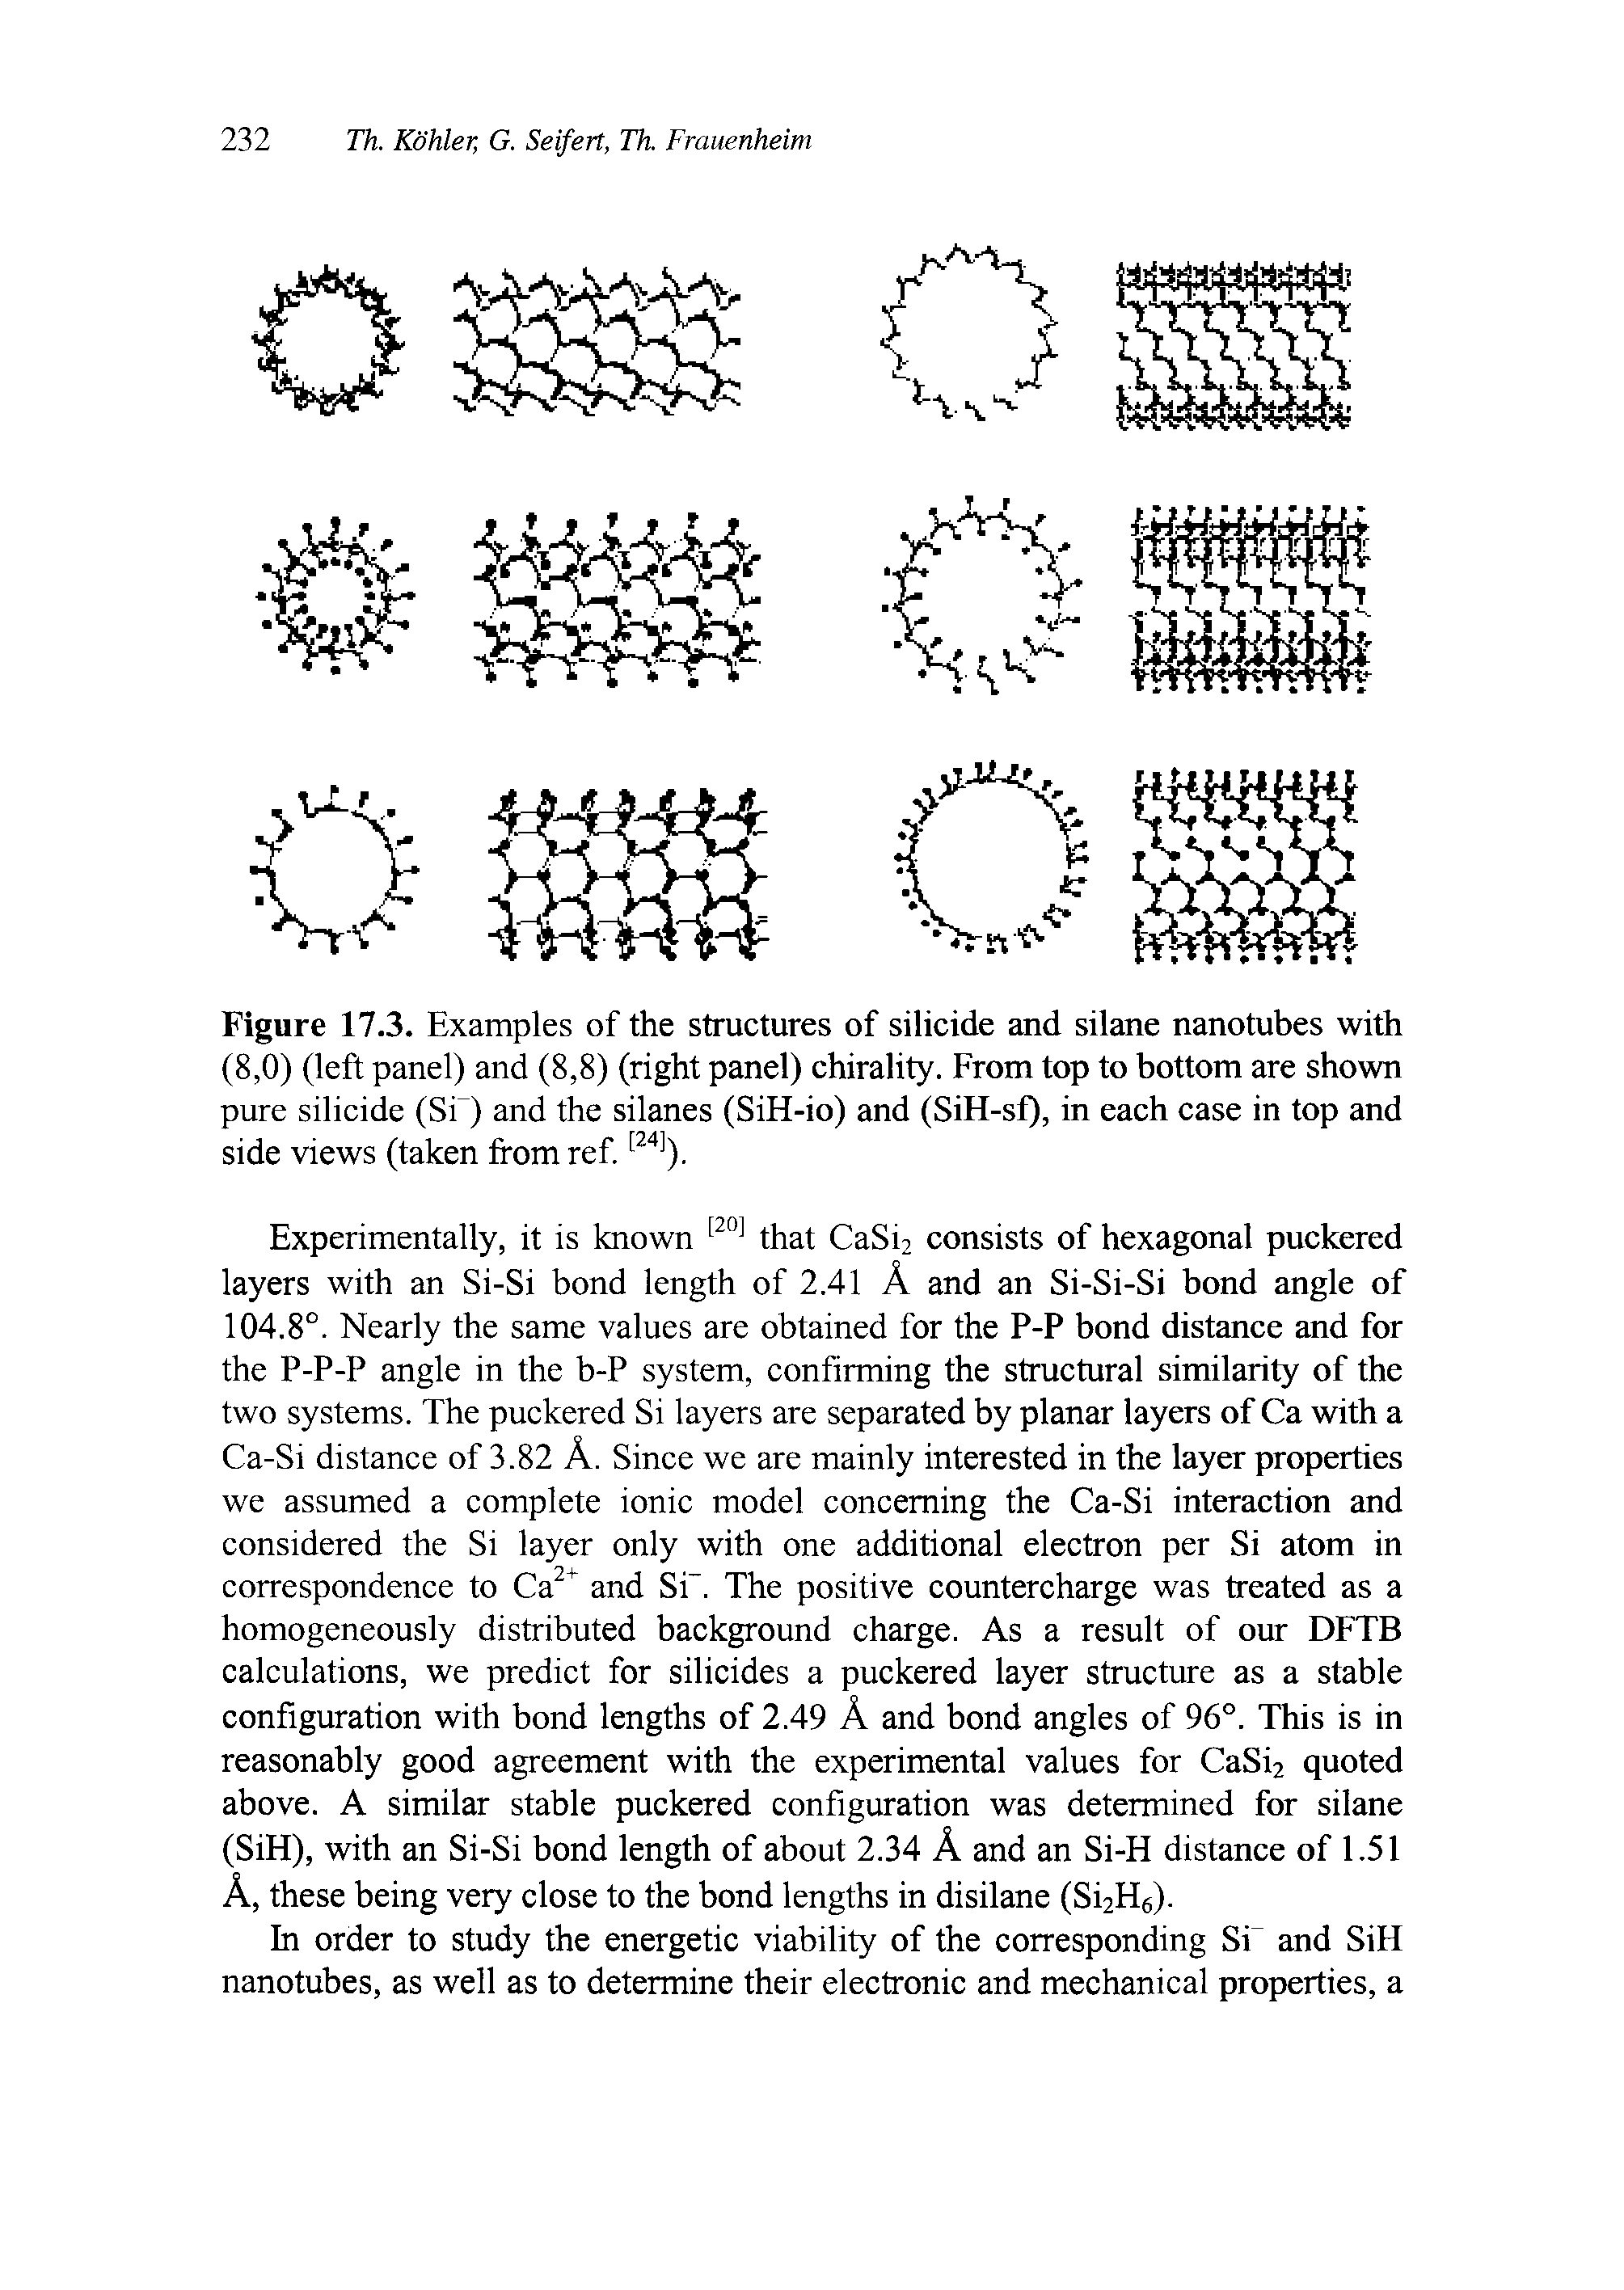 Figure 17.3. Examples of the structures of silicide and silane nanotubes with (8,0) (left panel) and (8,8) (right panel) chirality. From top to bottom are shown pure silicide (Si ) and the silanes (SiH-io) and (SiH-sf), in each case in top and side views (taken from ref...